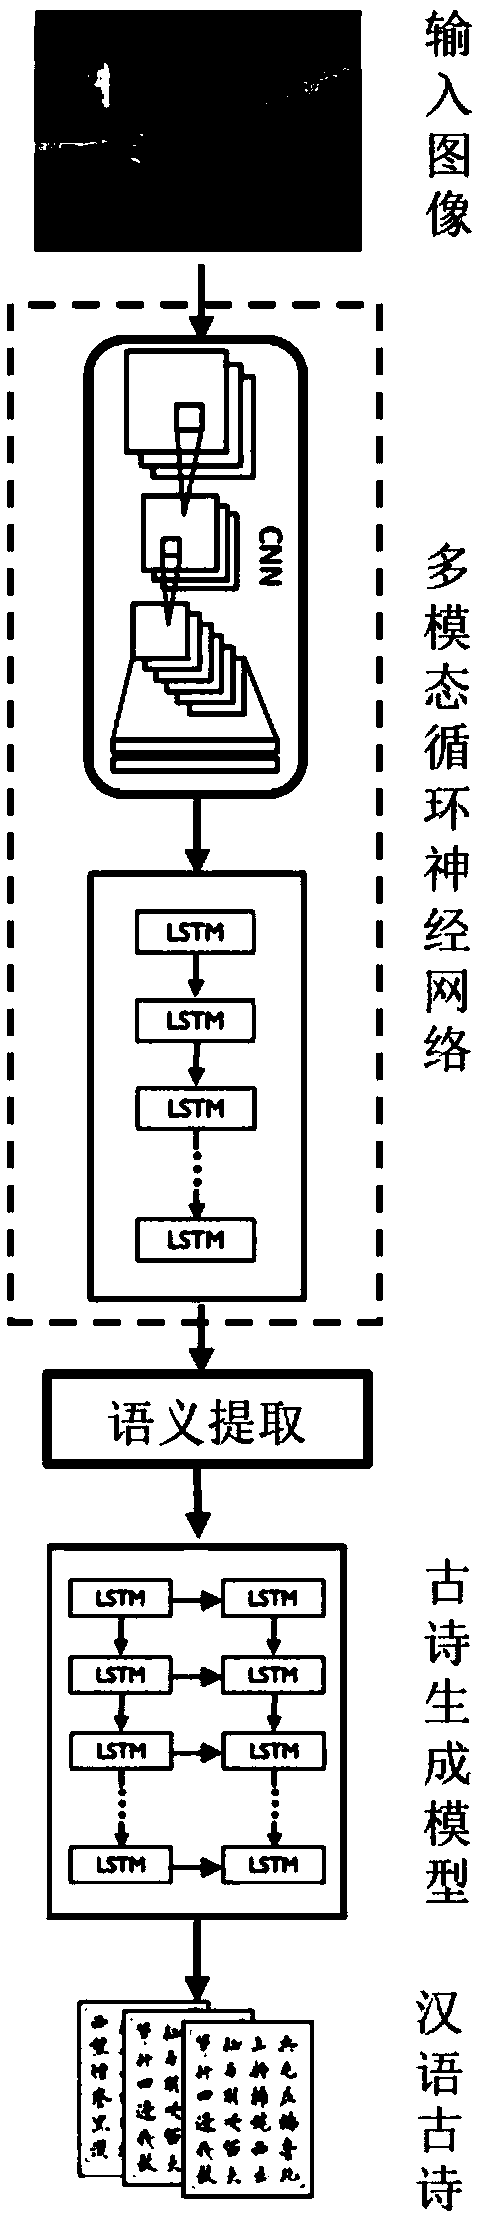 Method for converting pictures into Chinese ancient poems based on neural network model